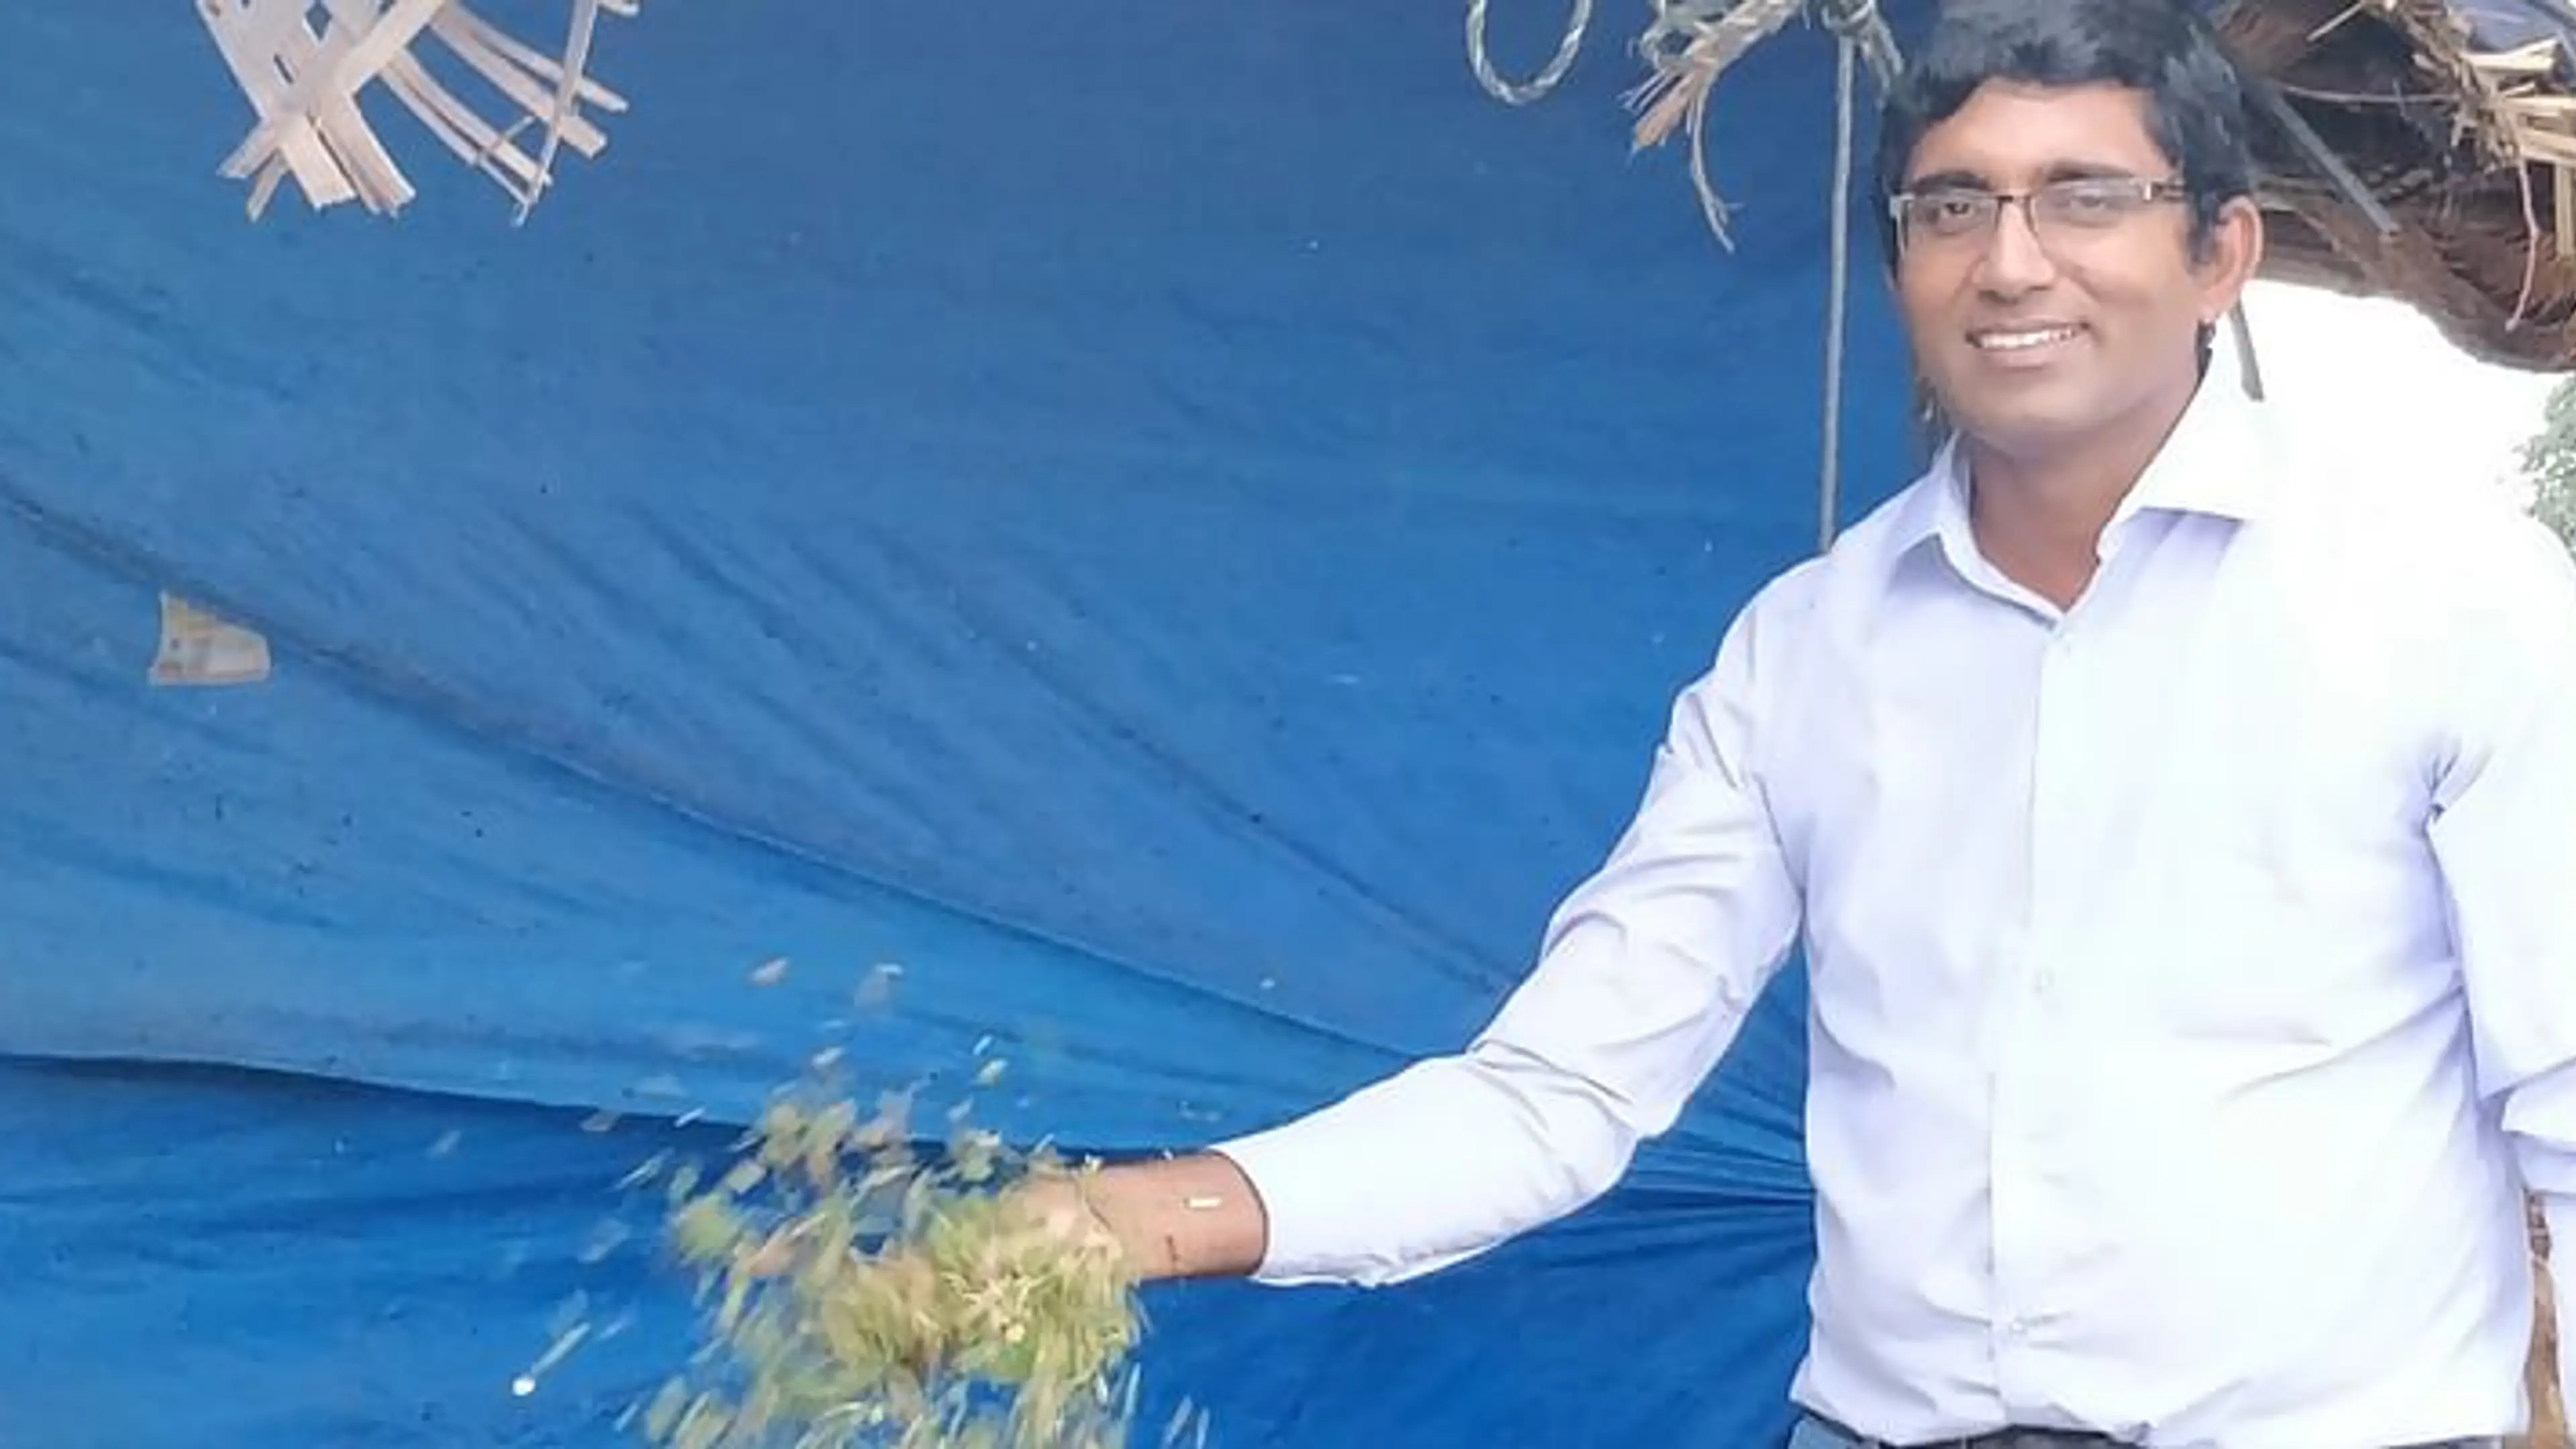 This engineer quit his US job, returned to India and bought 20 cows. Now his dairy brand earns Rs 44 Cr revenue